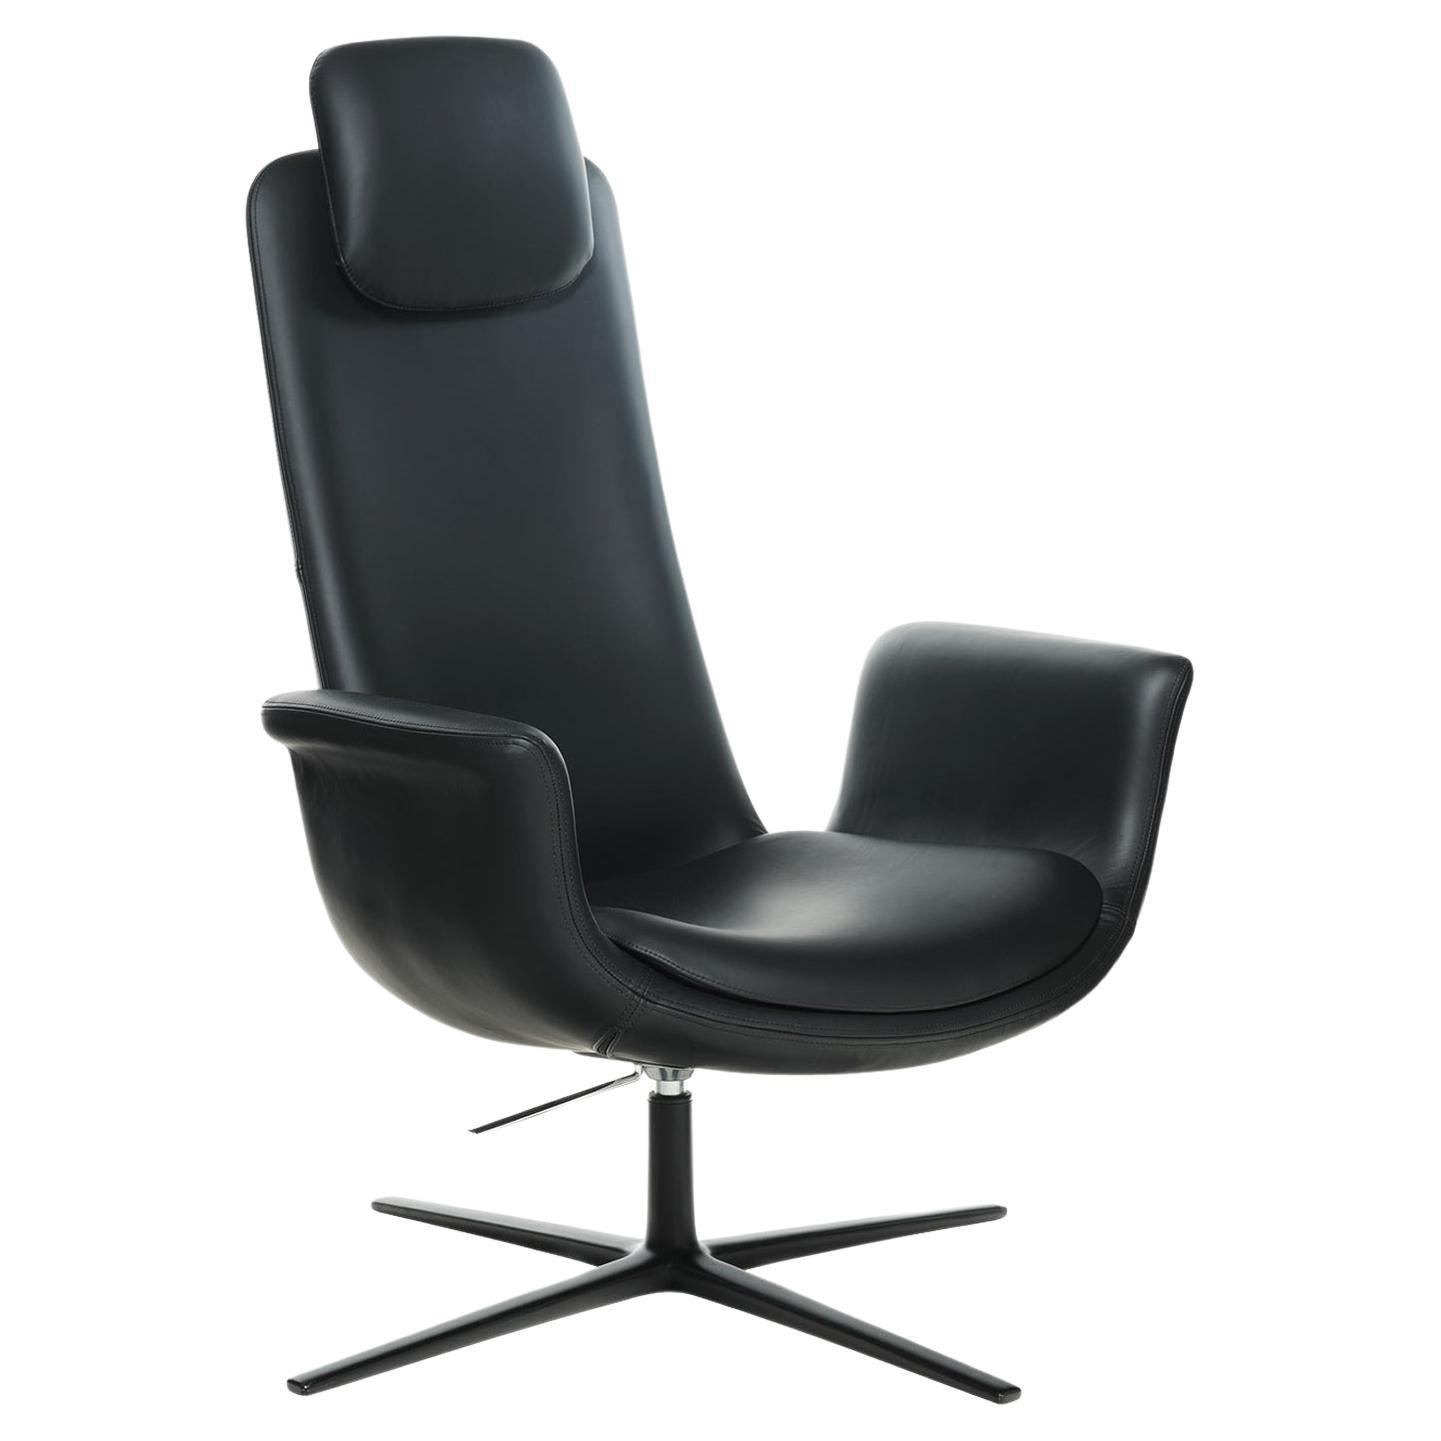 Armchair Office or Club Chair  "Odyssey" black leather fabric by Eugeni Quitllet For Sale